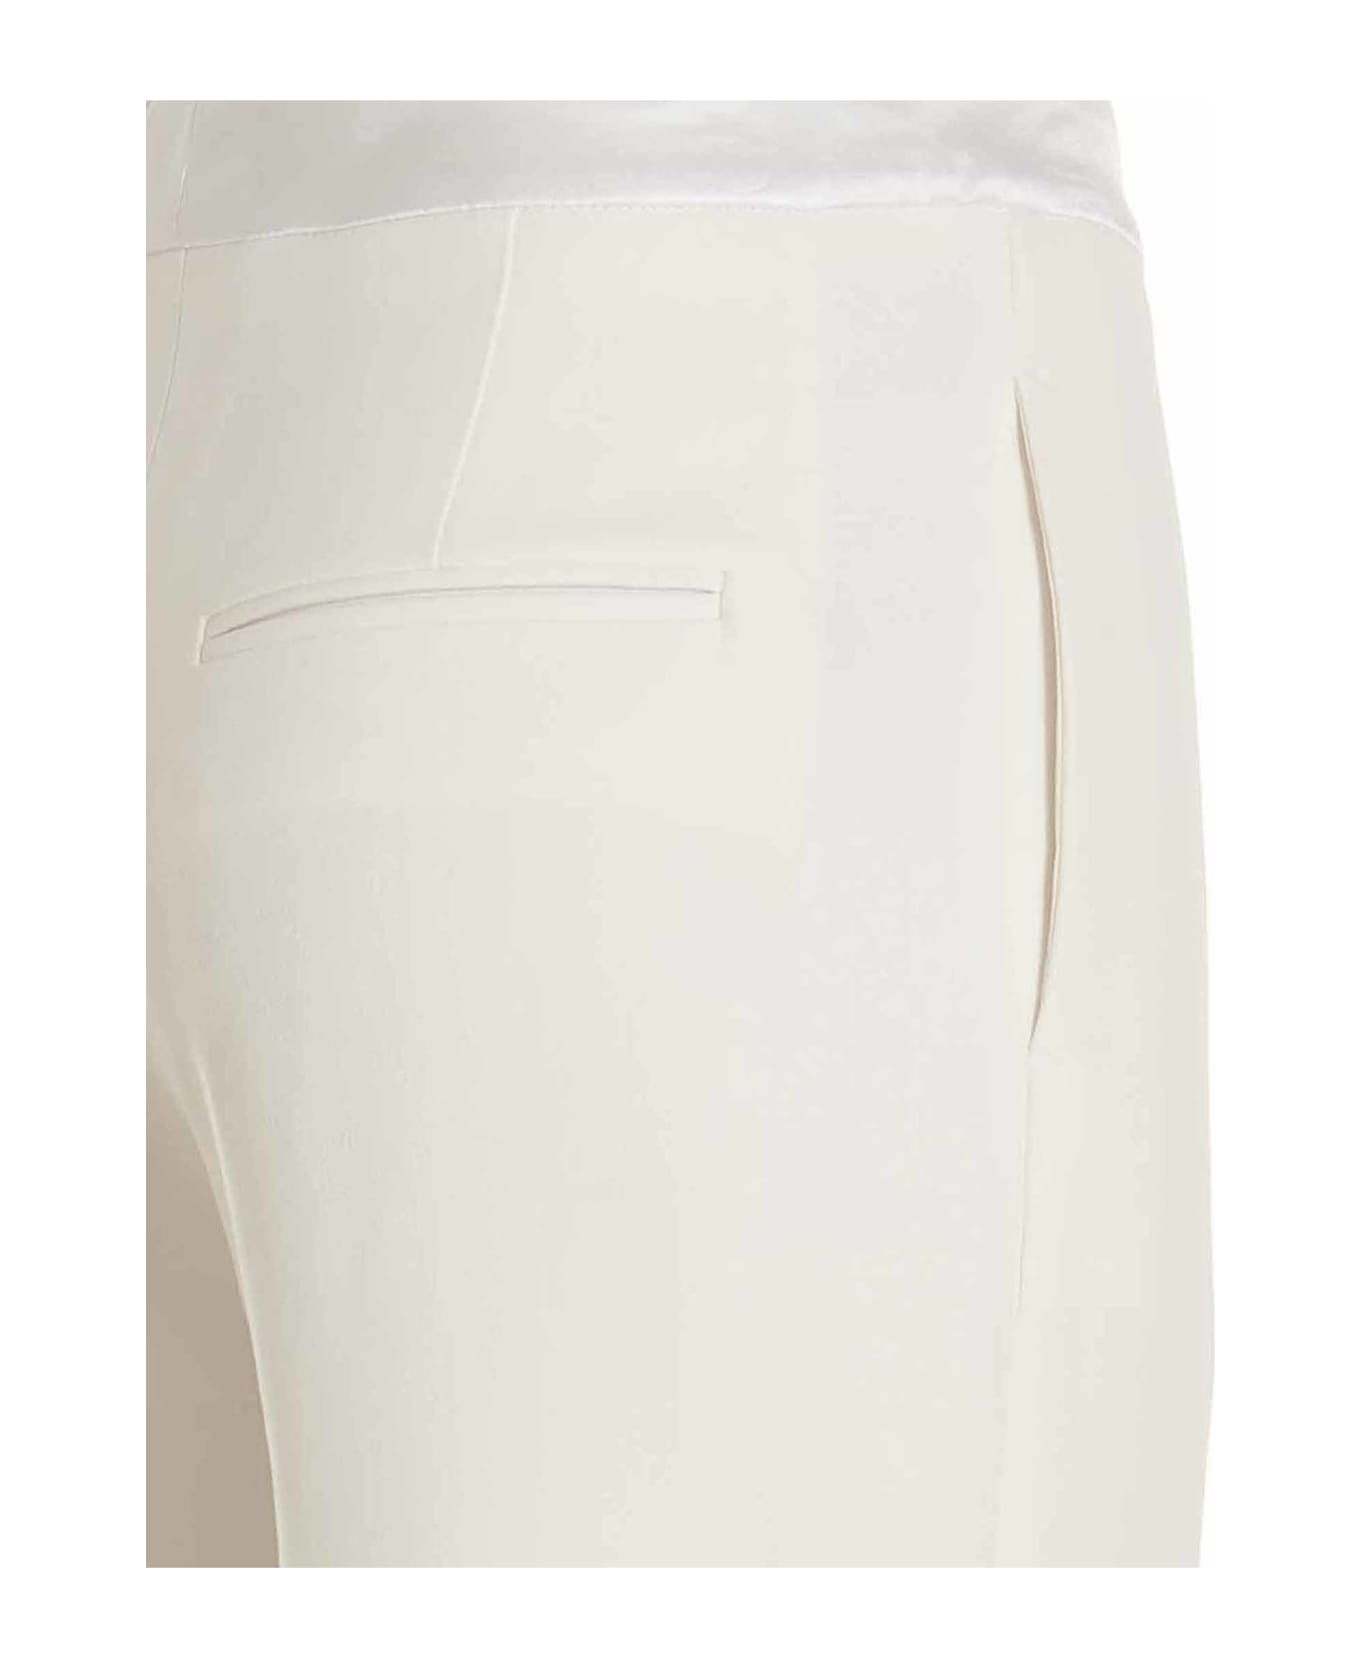 Ermanno Scervino Carrot Fit Pants - White ボトムス